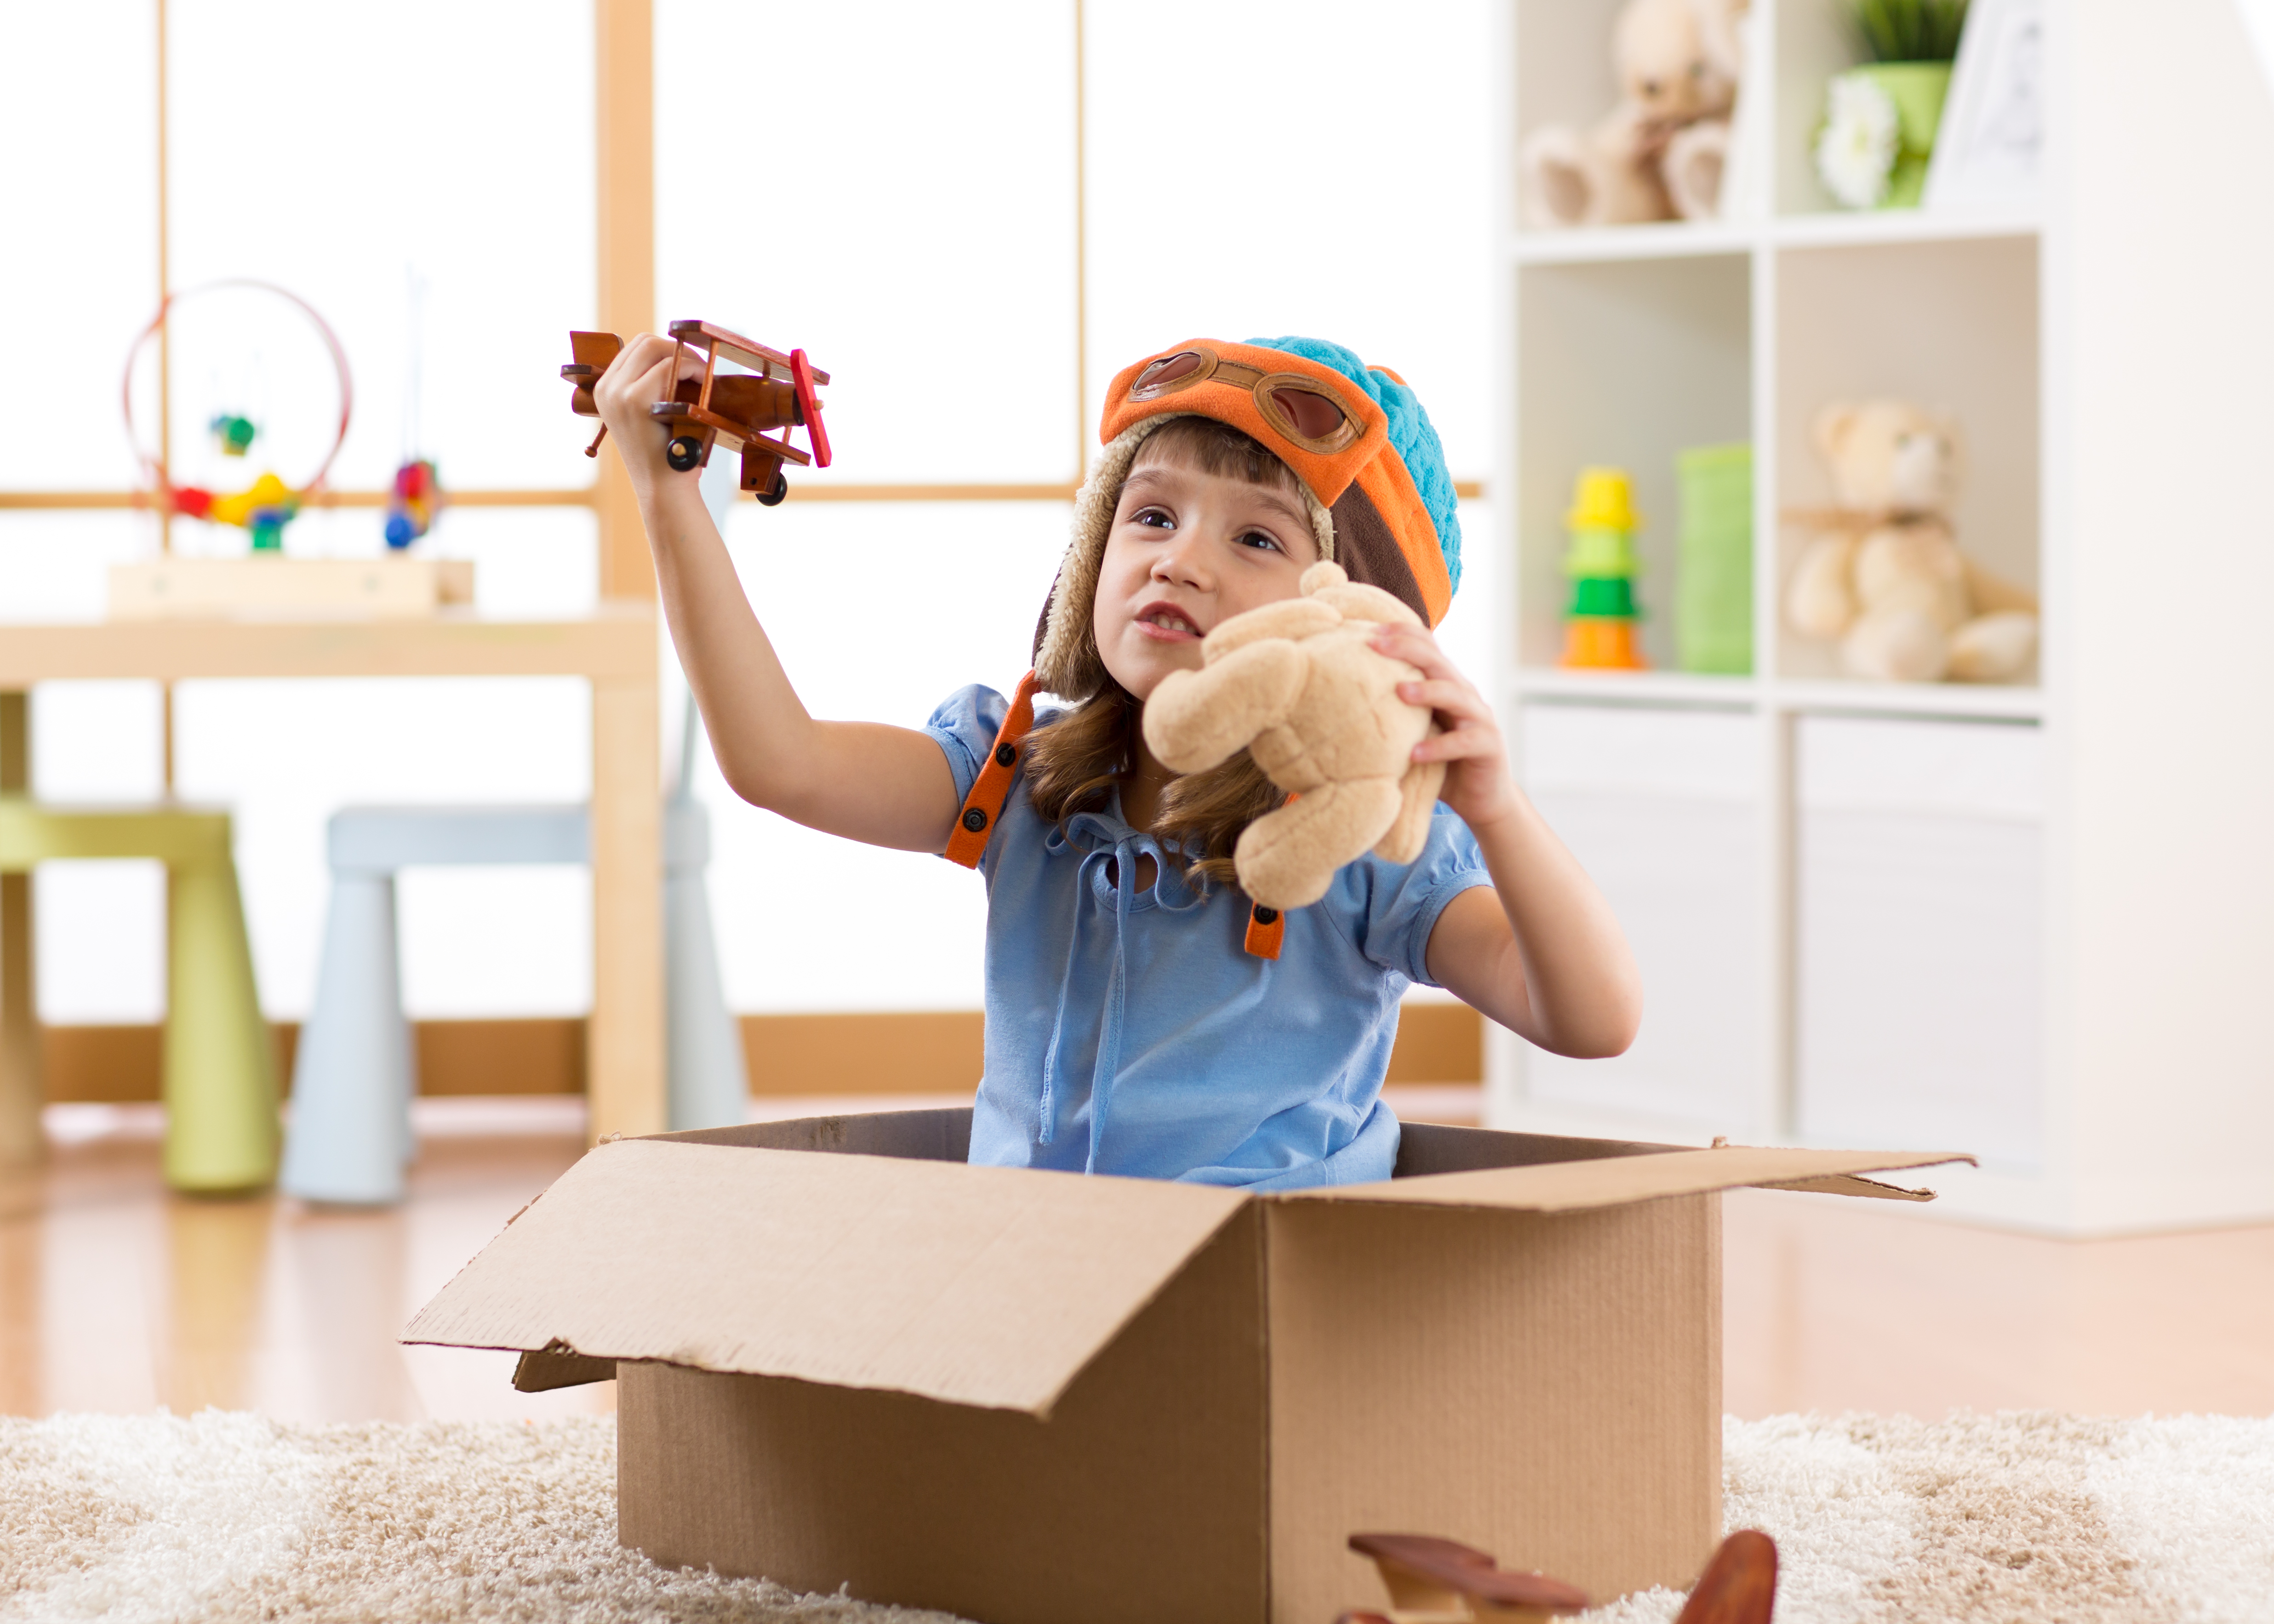 The Best Subscription Boxes for Kids